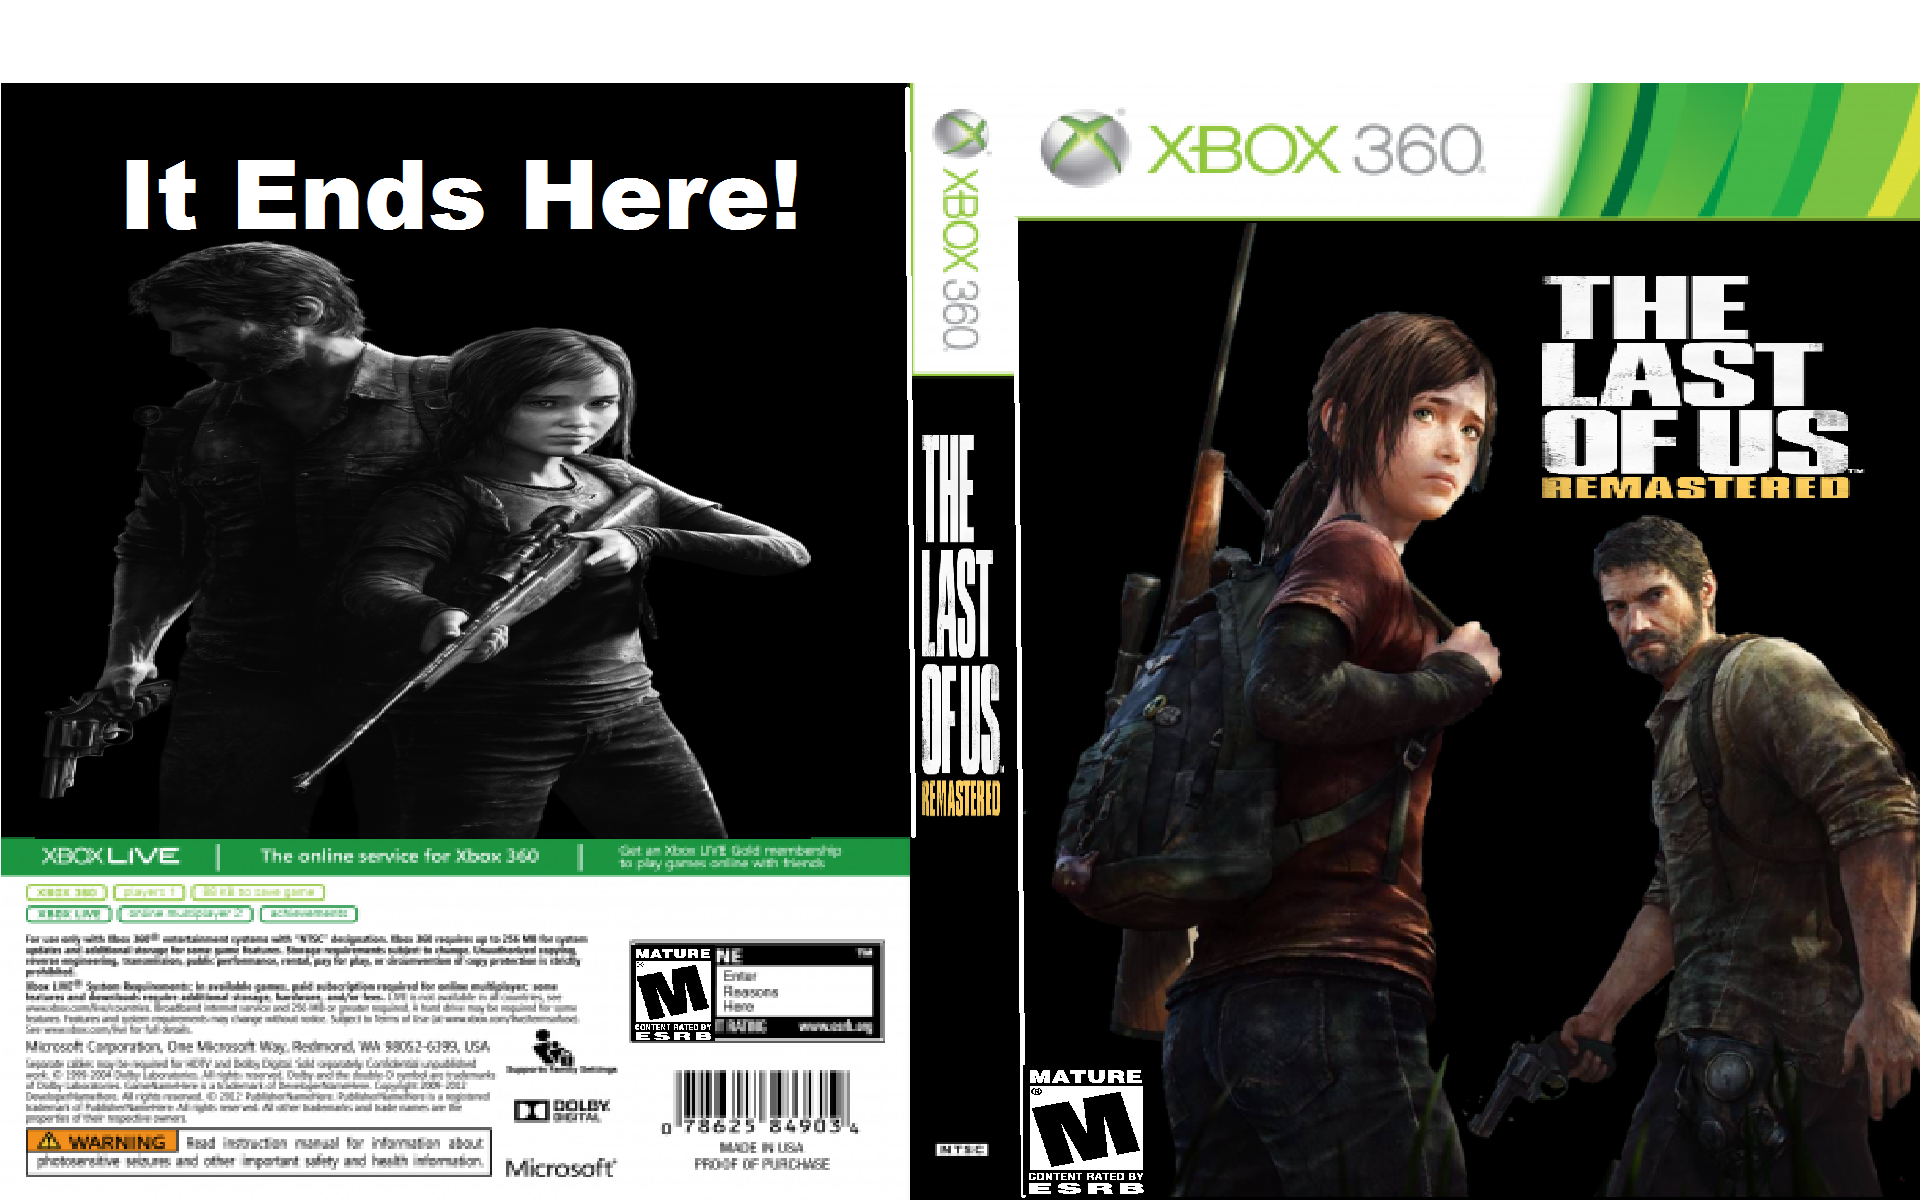 The Last of Us Remastered Xbox 360 box cover